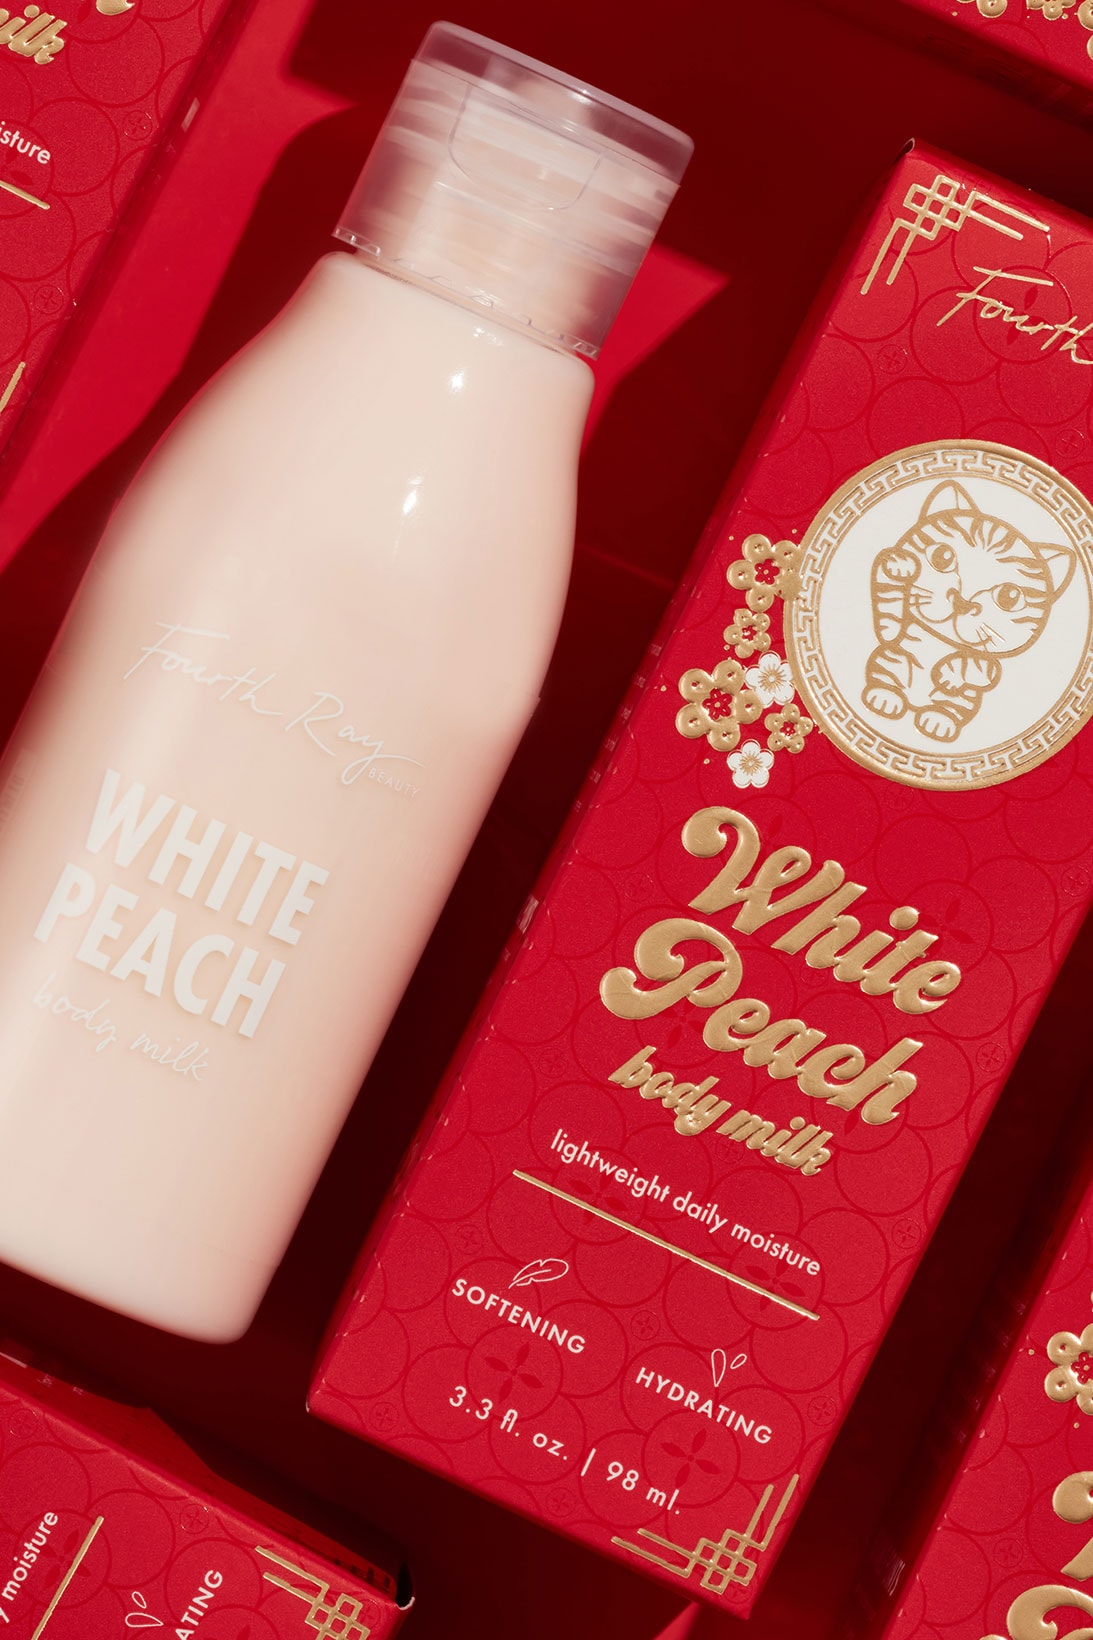 ColourPop Cosmetics Year of the Tiger Lunar New Year Collection Body Milk